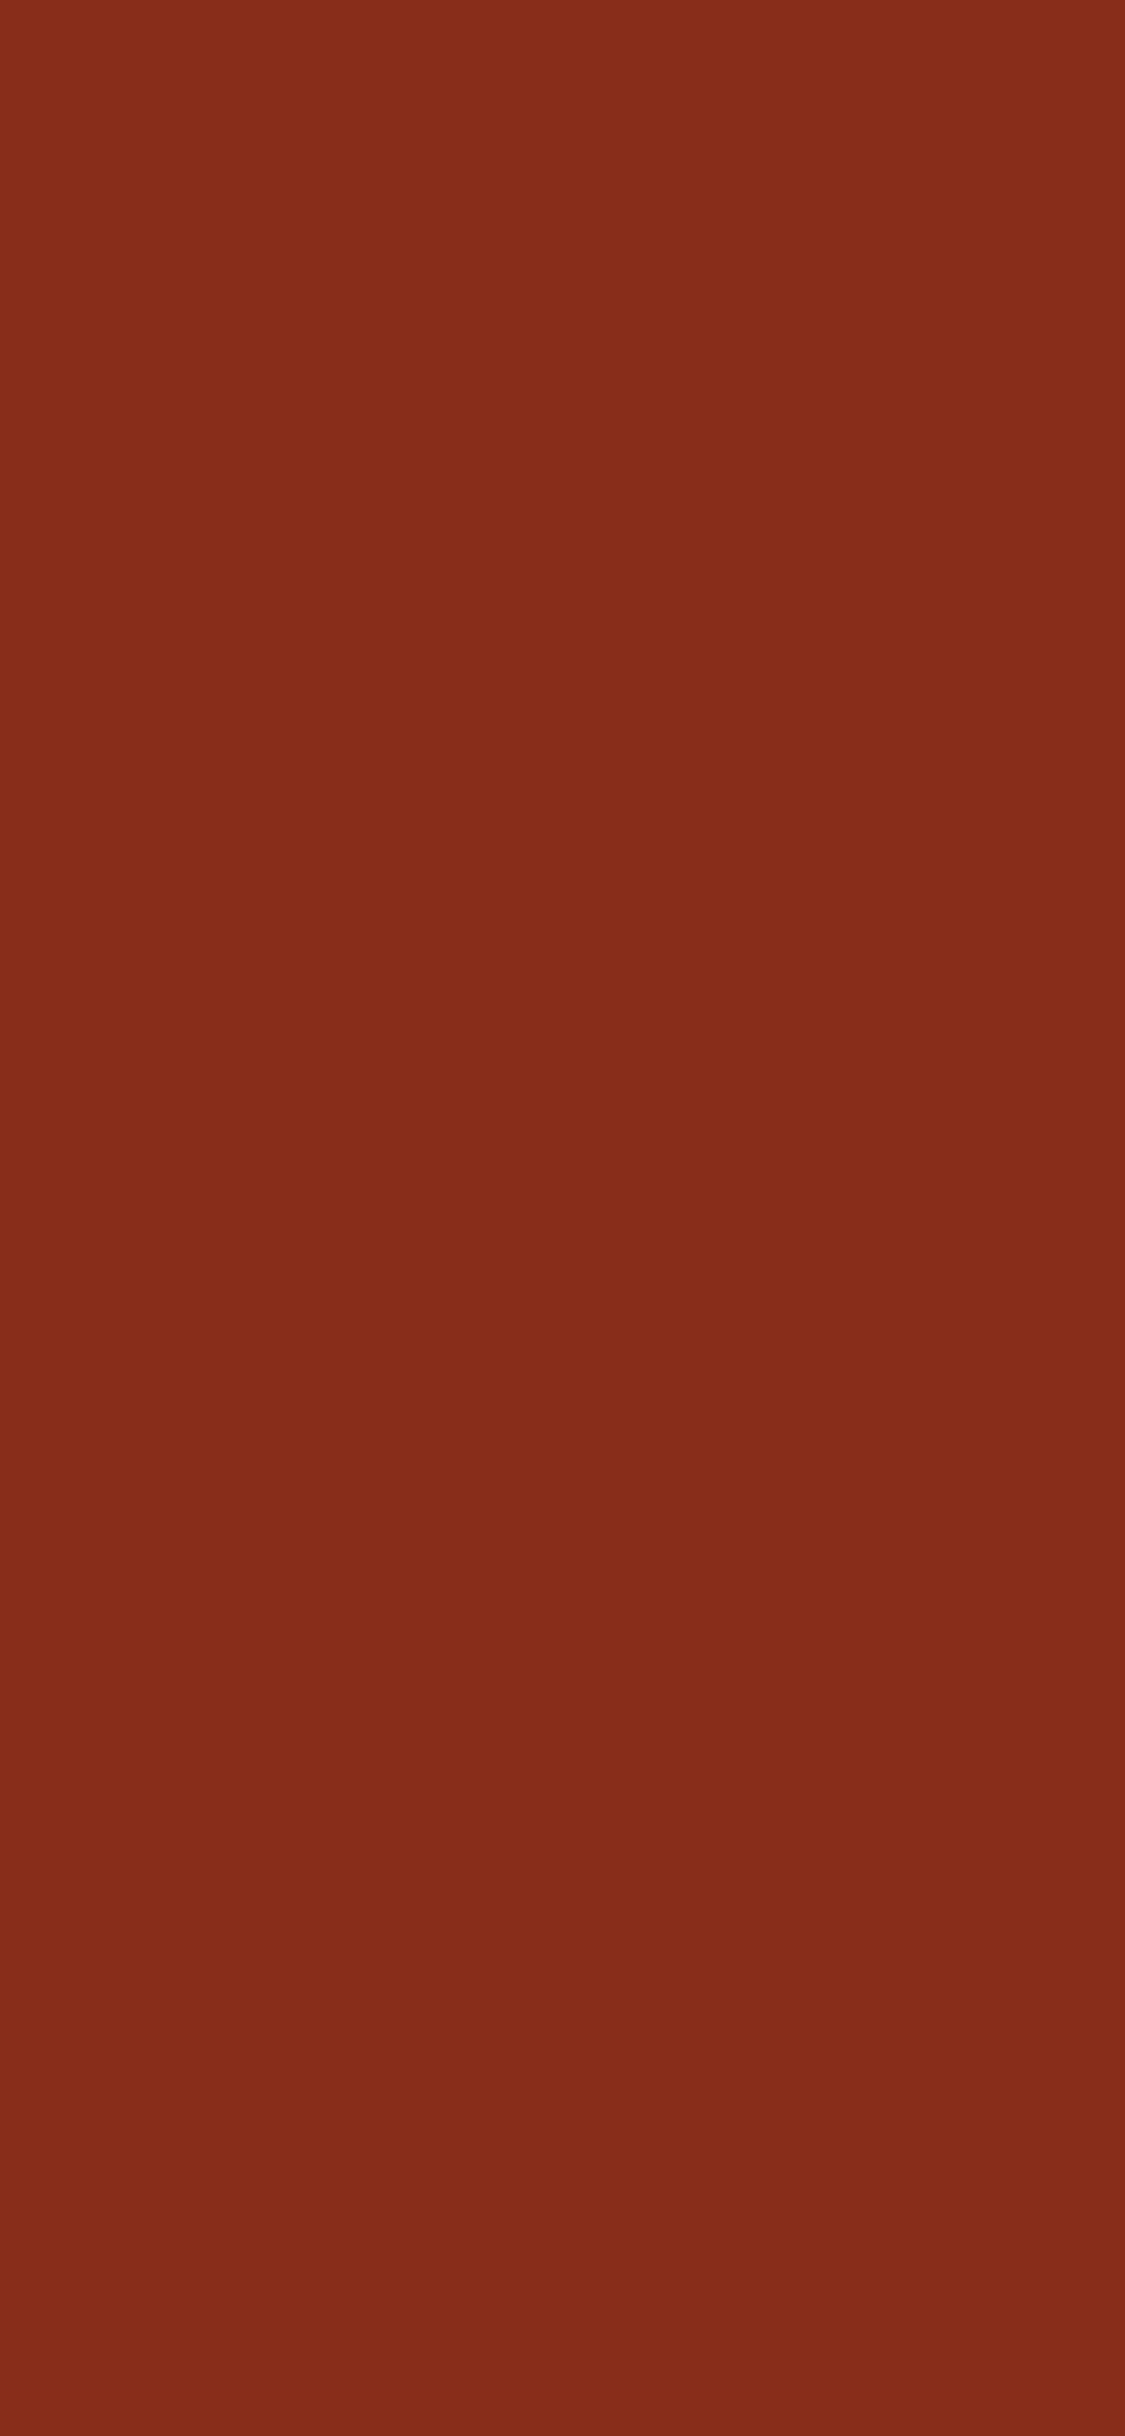 1125x2436 Sienna Solid Color Background